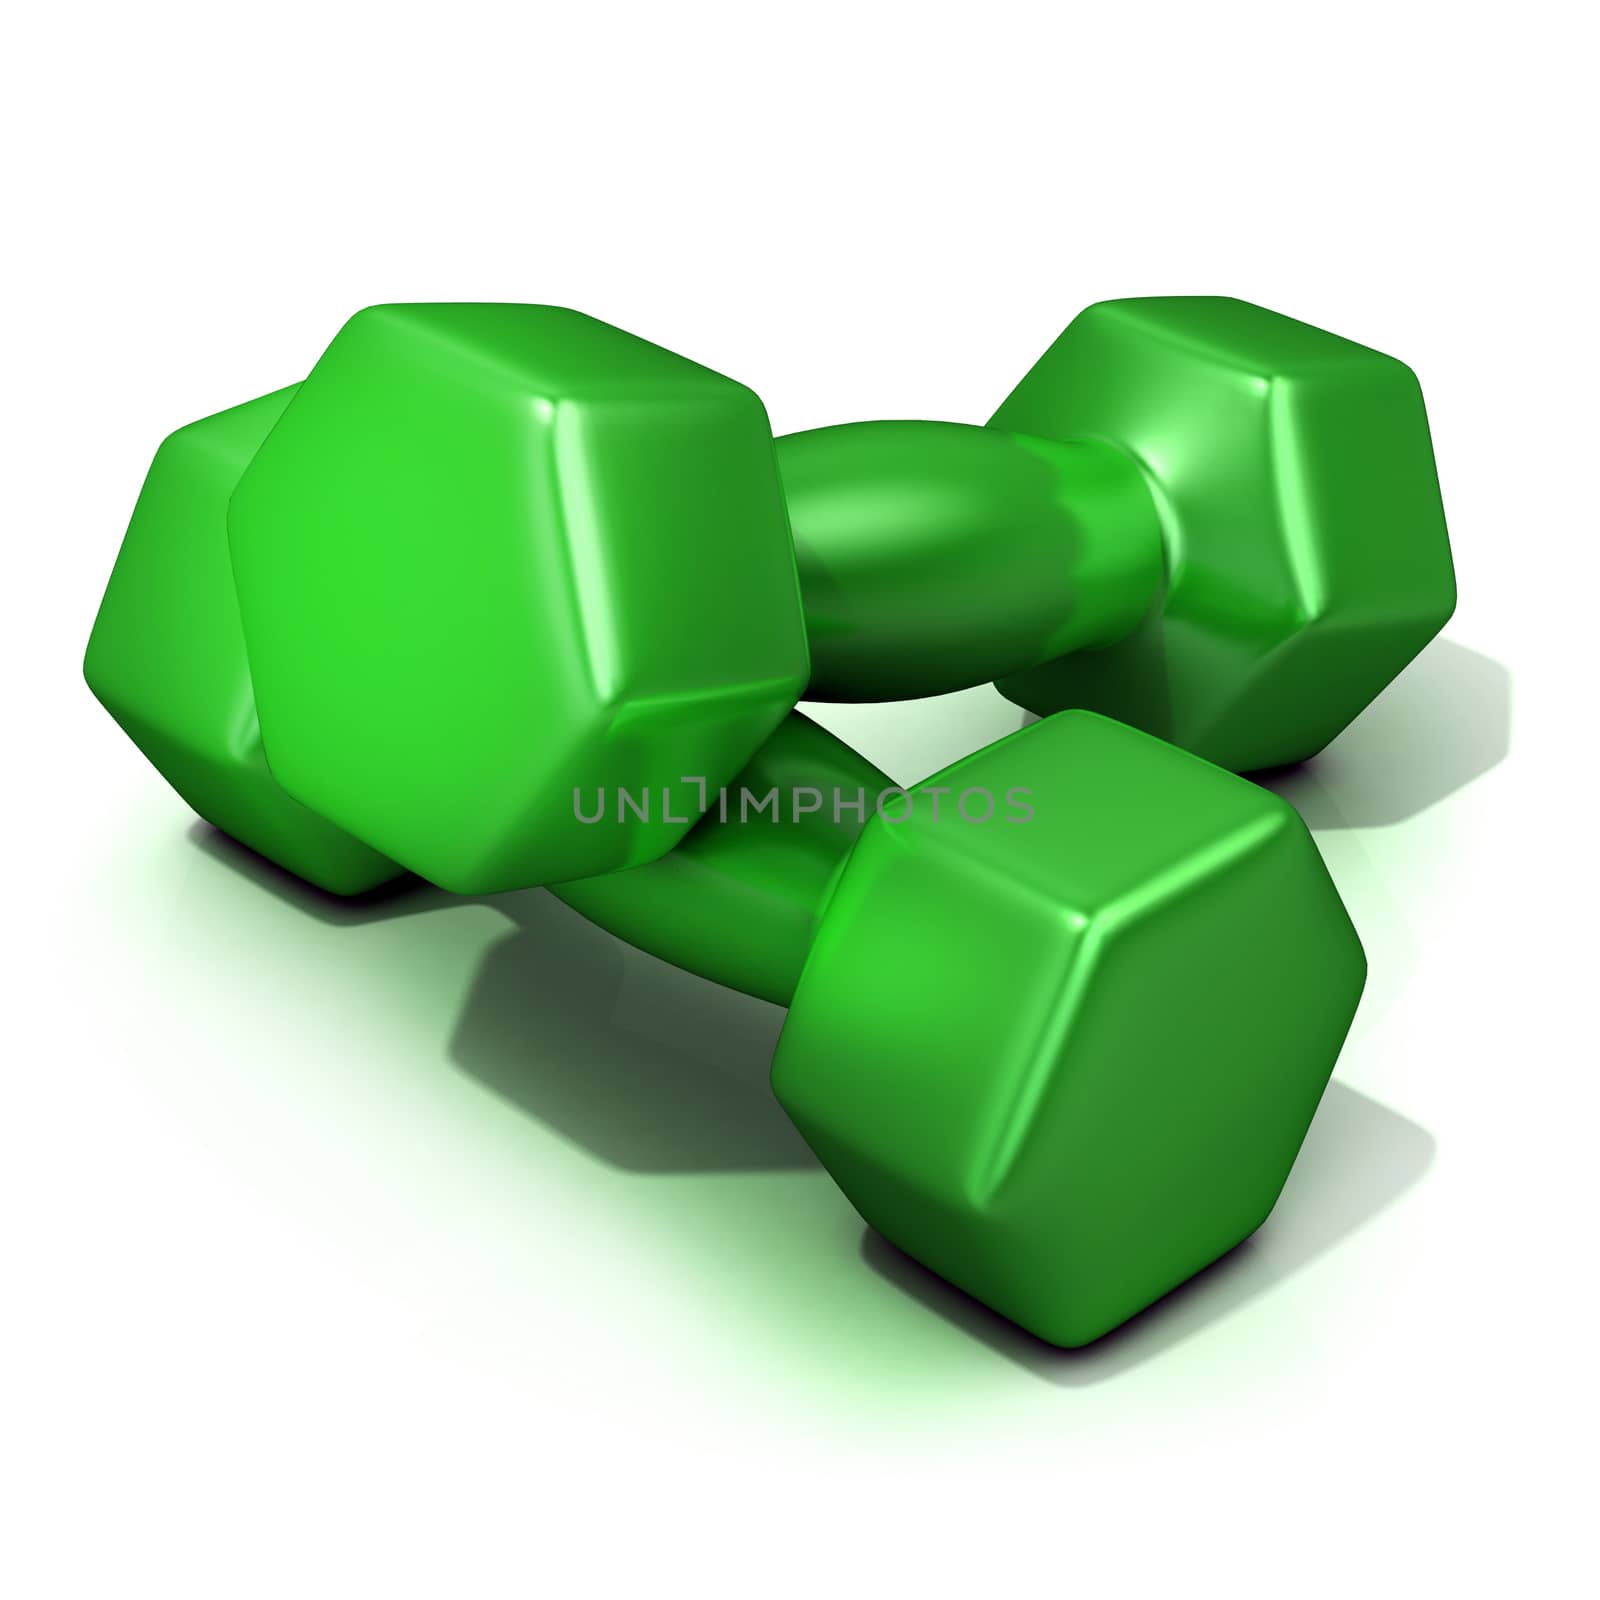 Green weights isolated on white background